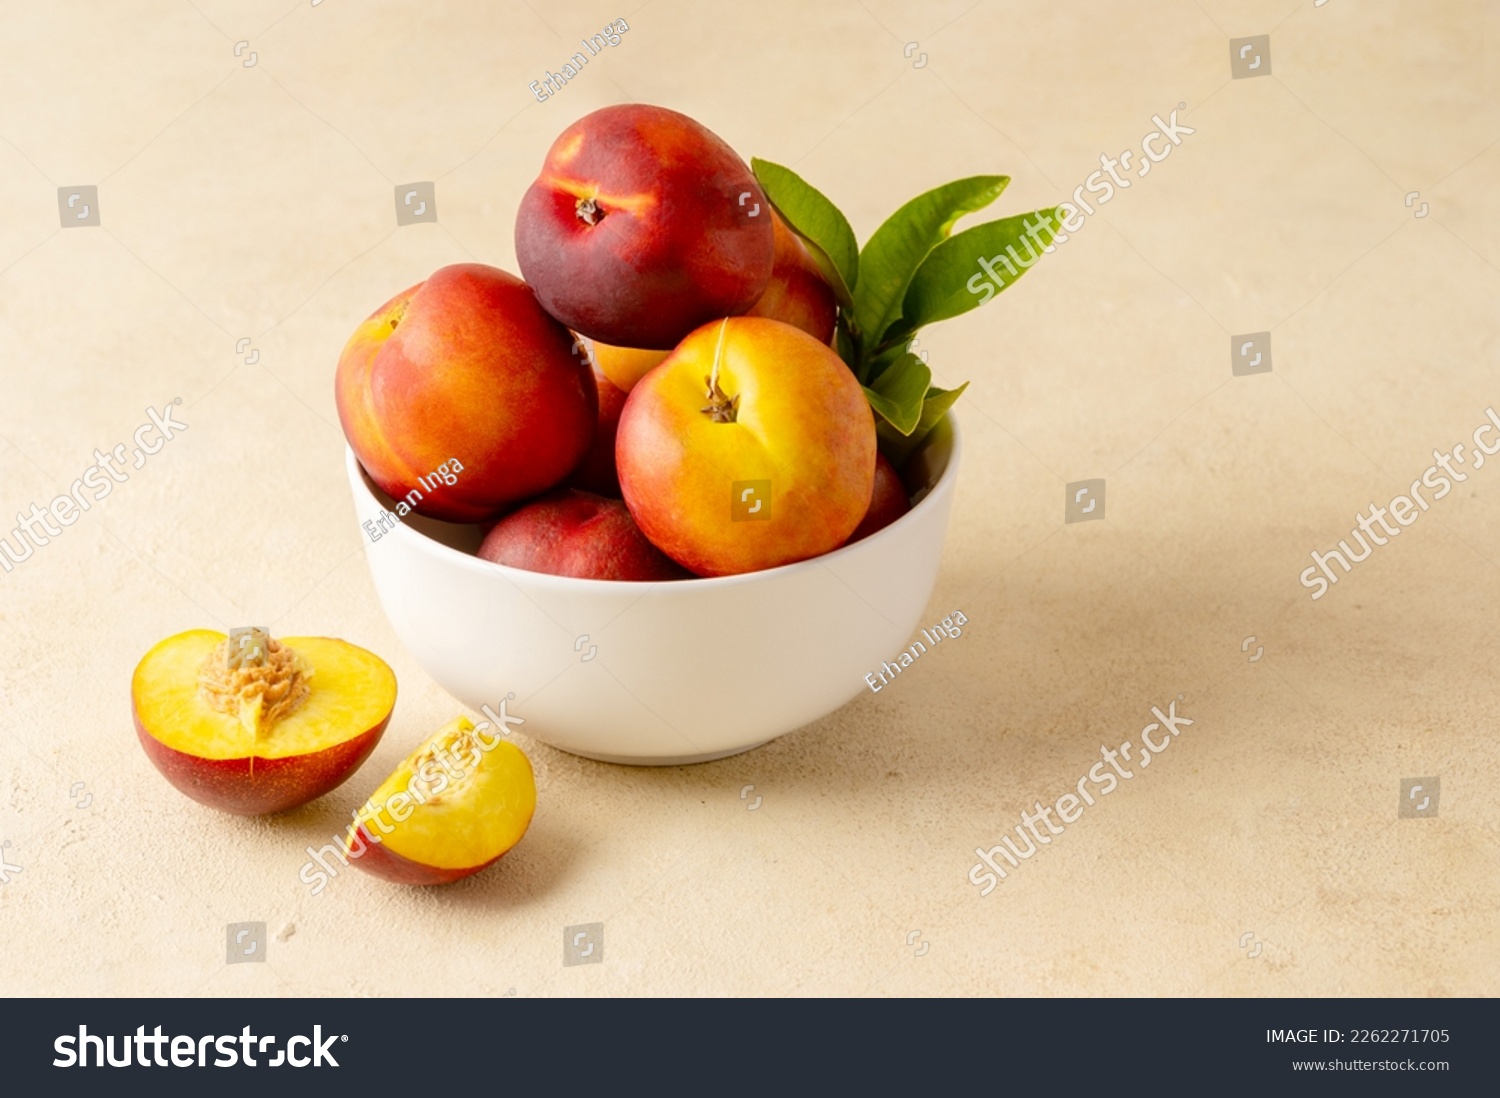 Whole nectarine peaches, fresh red fruits in a bowl. Neutral background. #2262271705